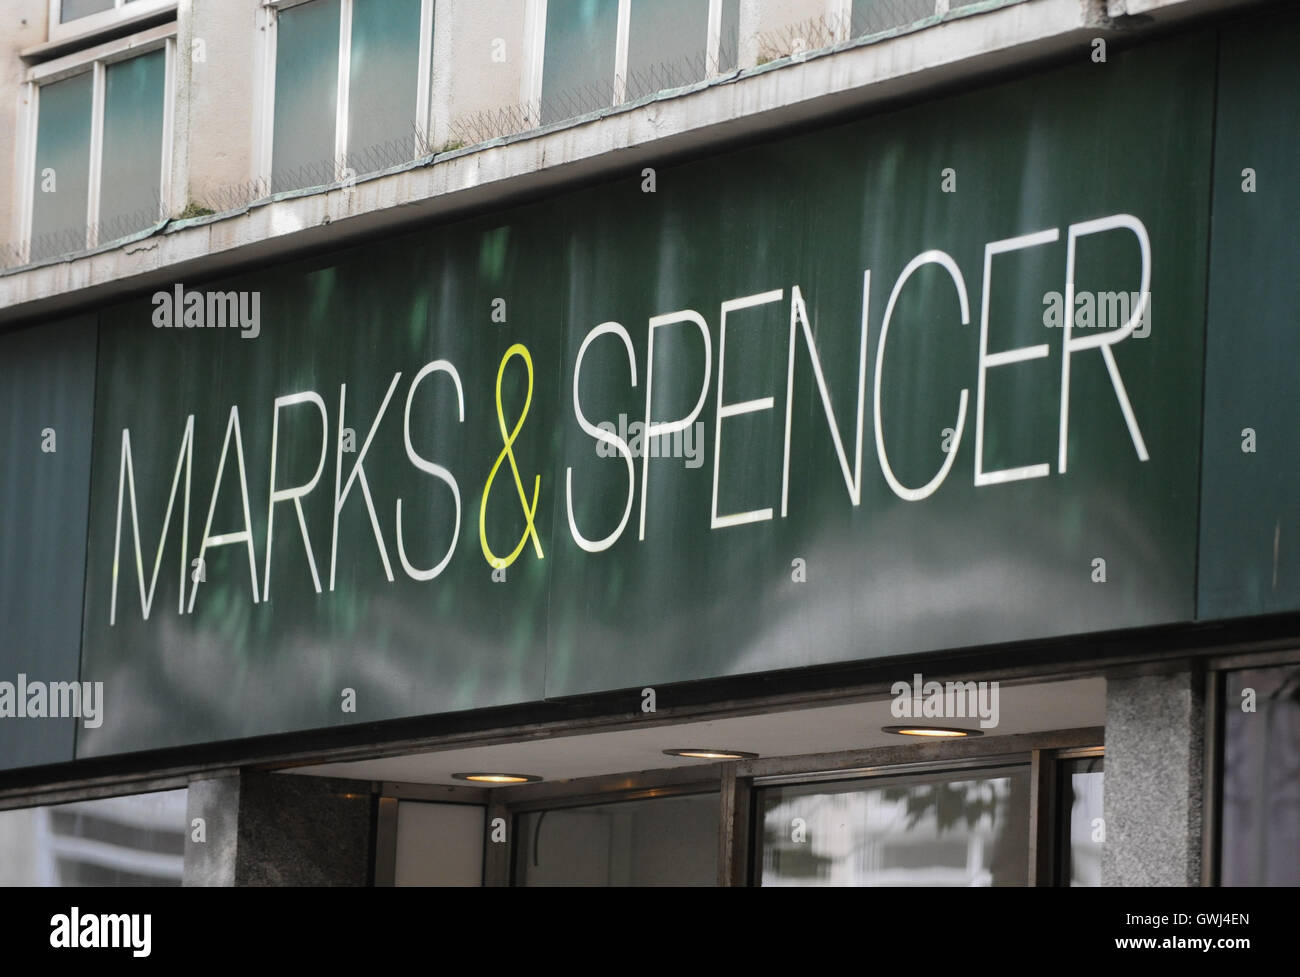 Swansea, Wales, UK. Alamy Stock. A Marks & Spenser sign on a UK high street Stock Photo